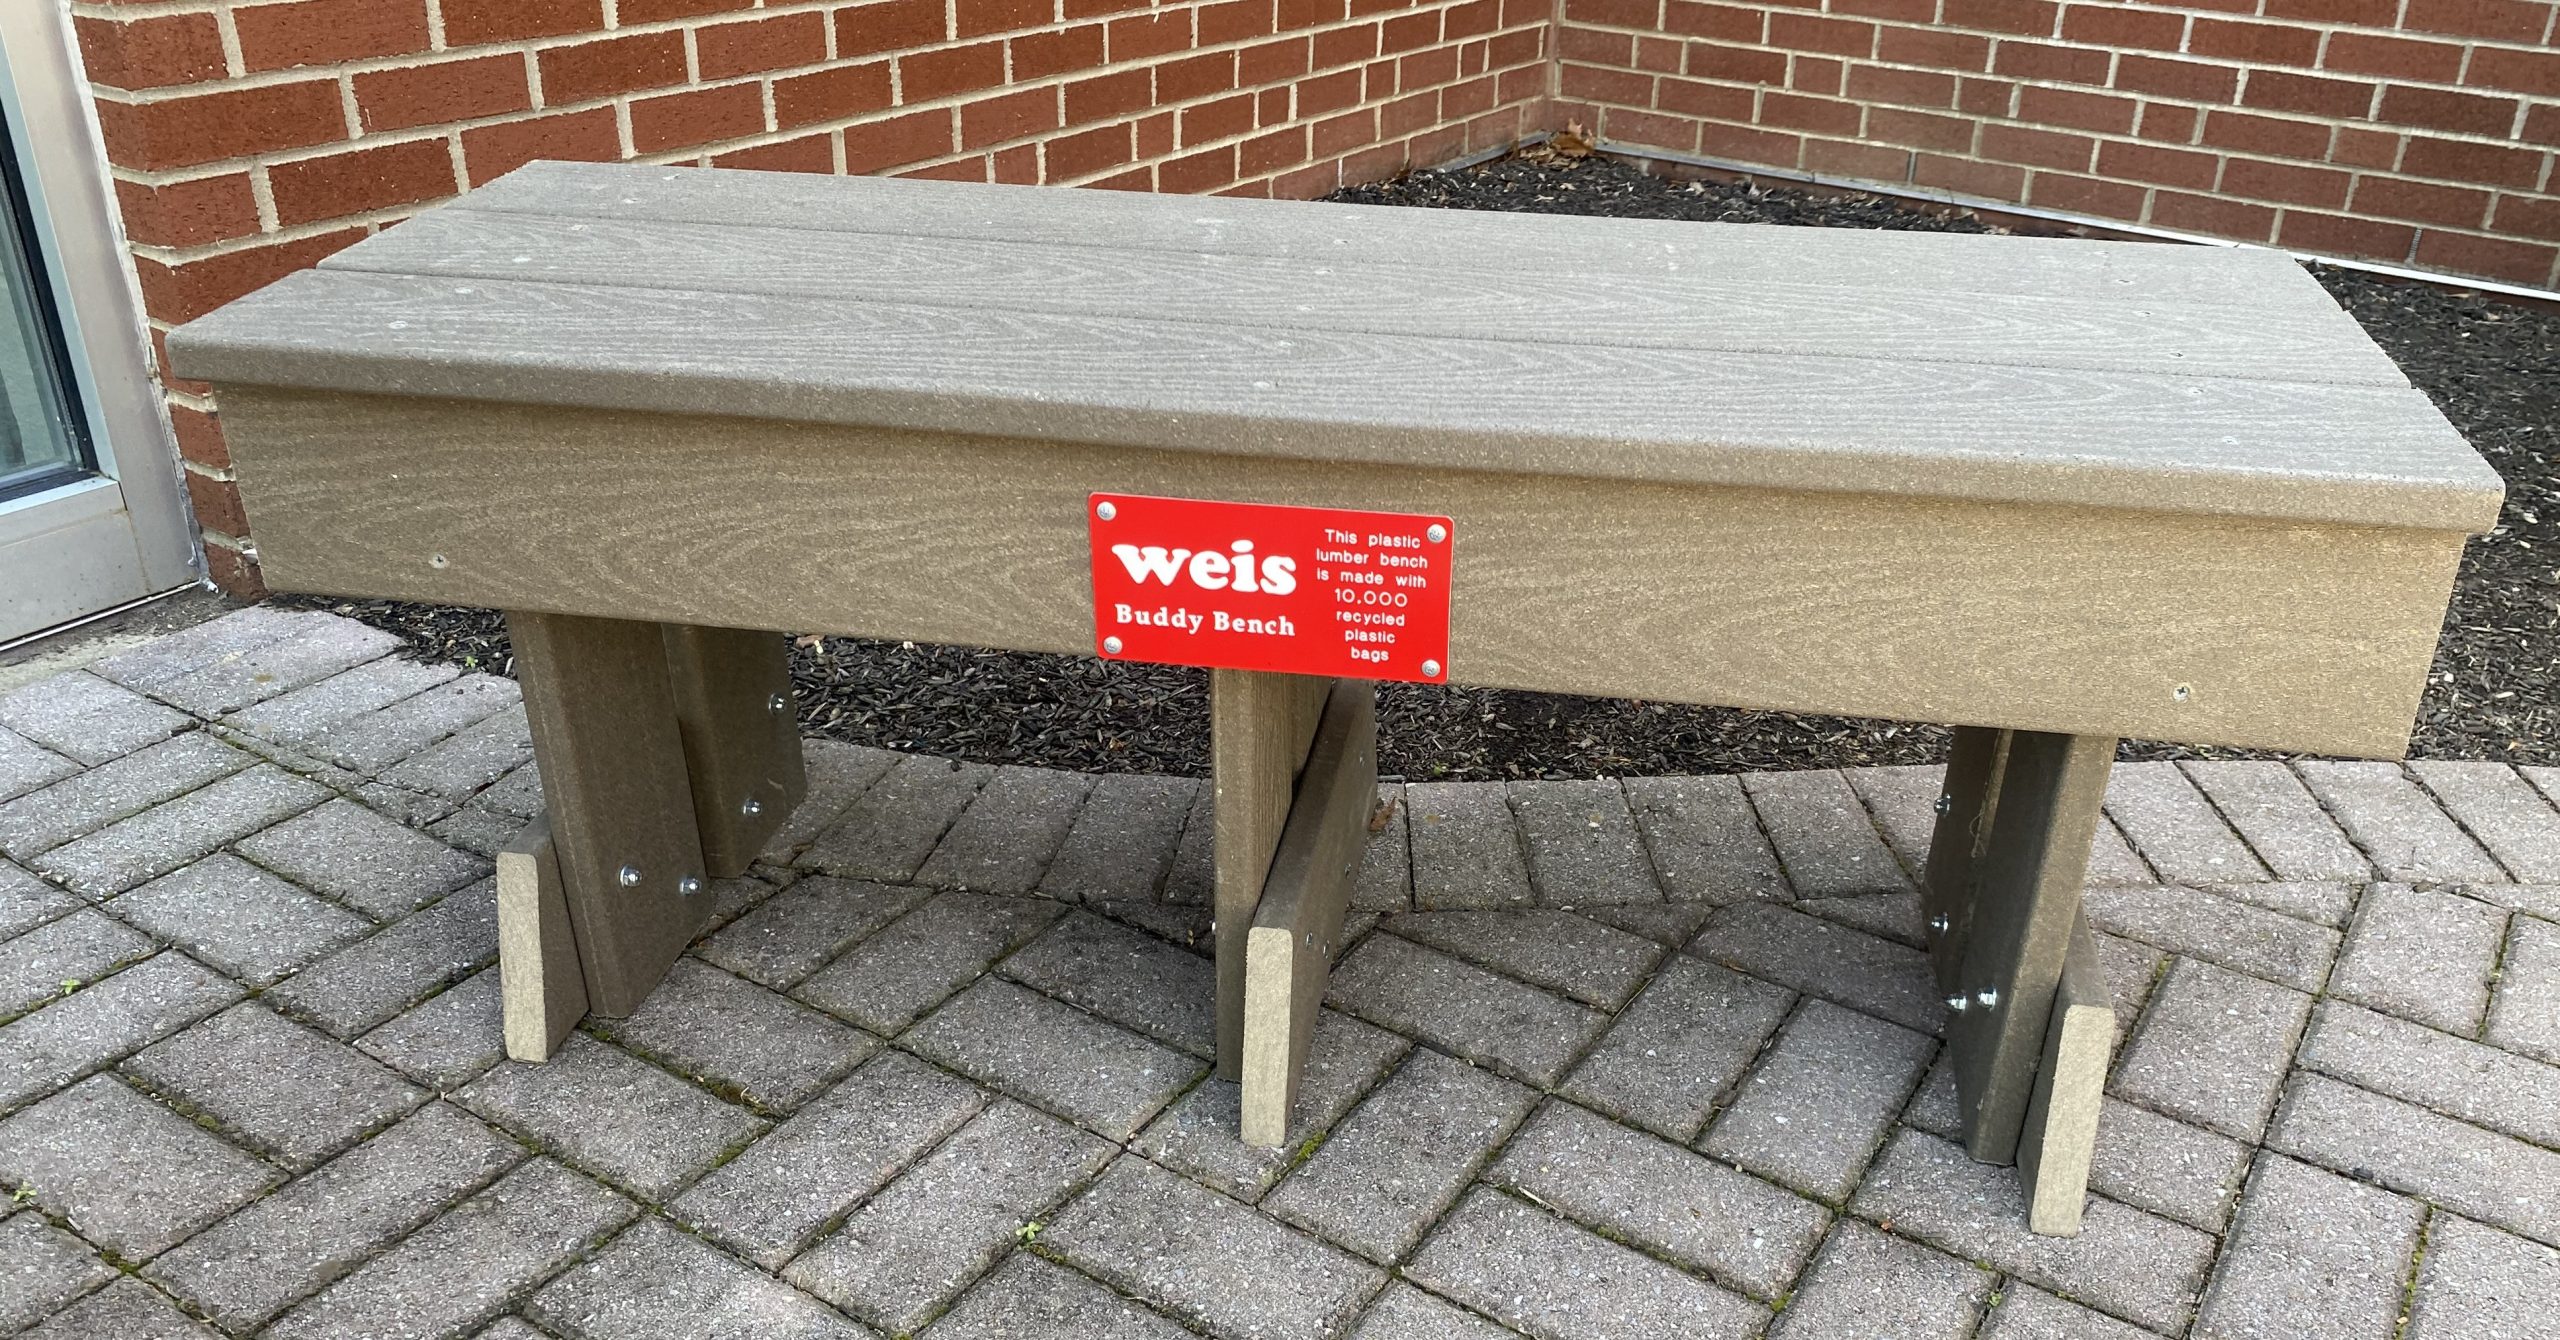 The Elementary School teamed up with Weis Markets and Trex to participate in Trex’s nationwide recycling program to turn 10,000 grocery bags into a bench.  The goal was met within a month.  Weis Markets kindly donated 2 additional benches to the school.